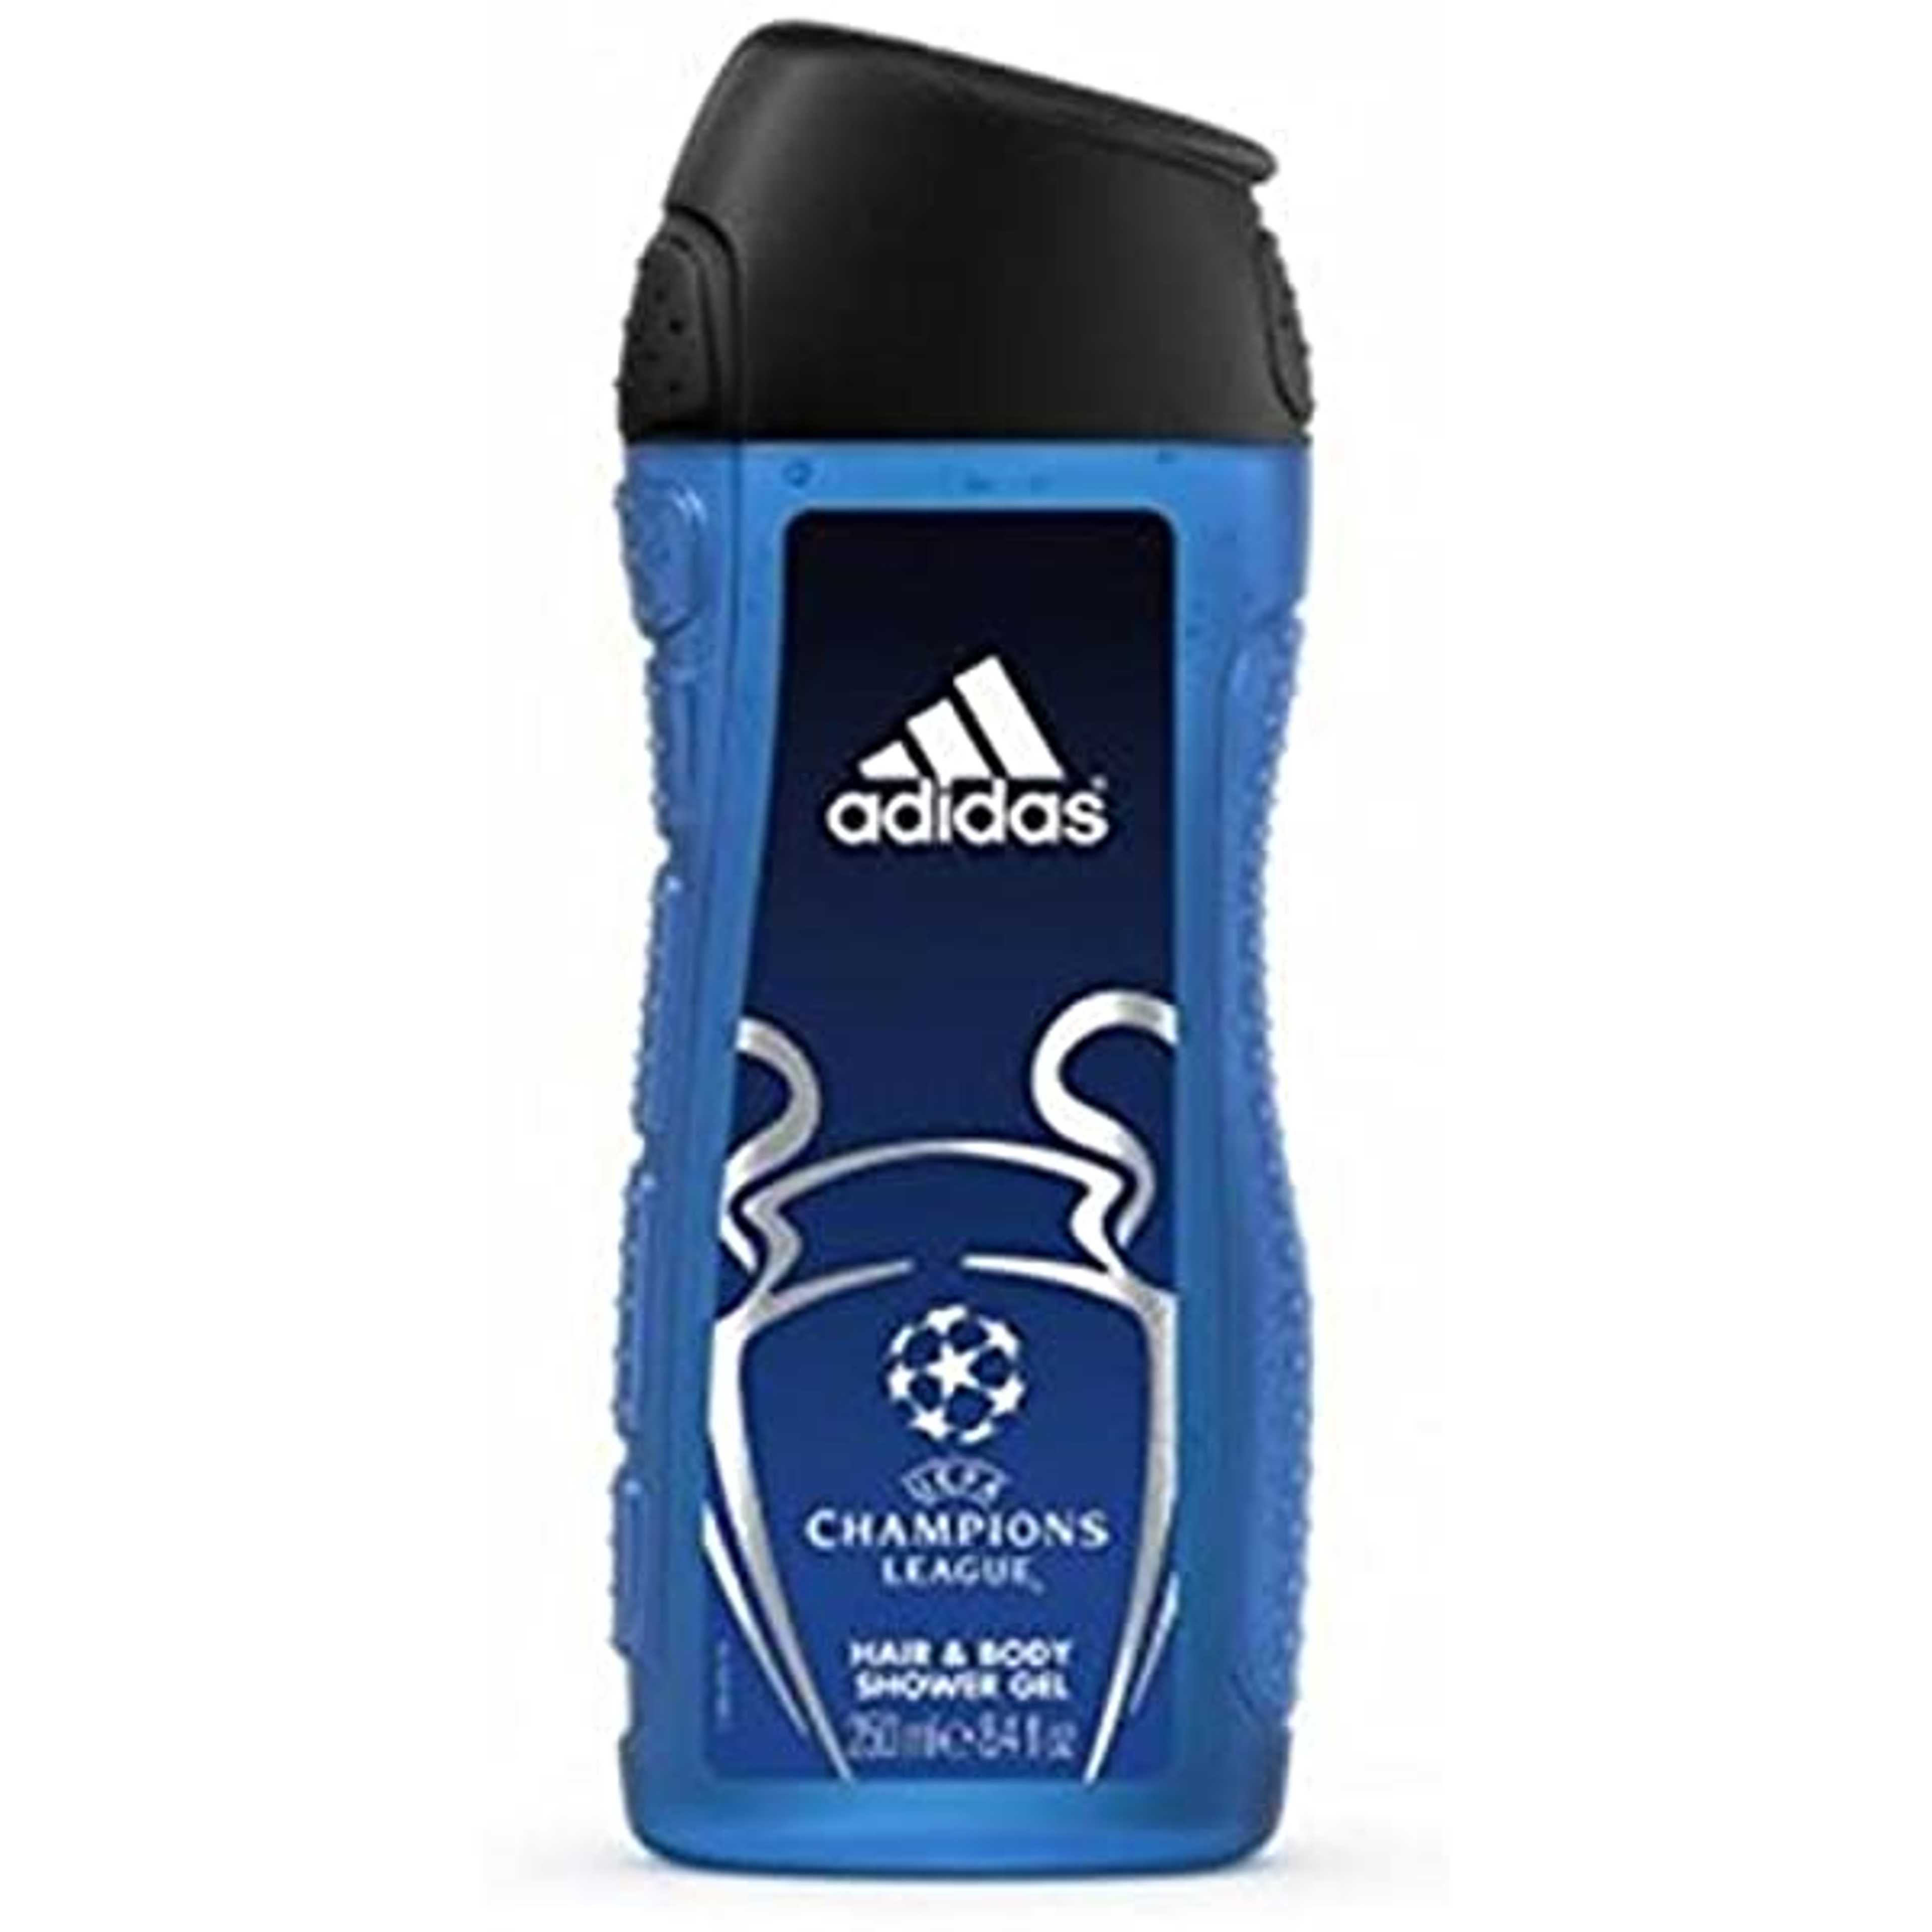 ADDIDAS_SHOWER GEL 3IN1 CHAMPIONS LEAGUE 250ML (Imported)